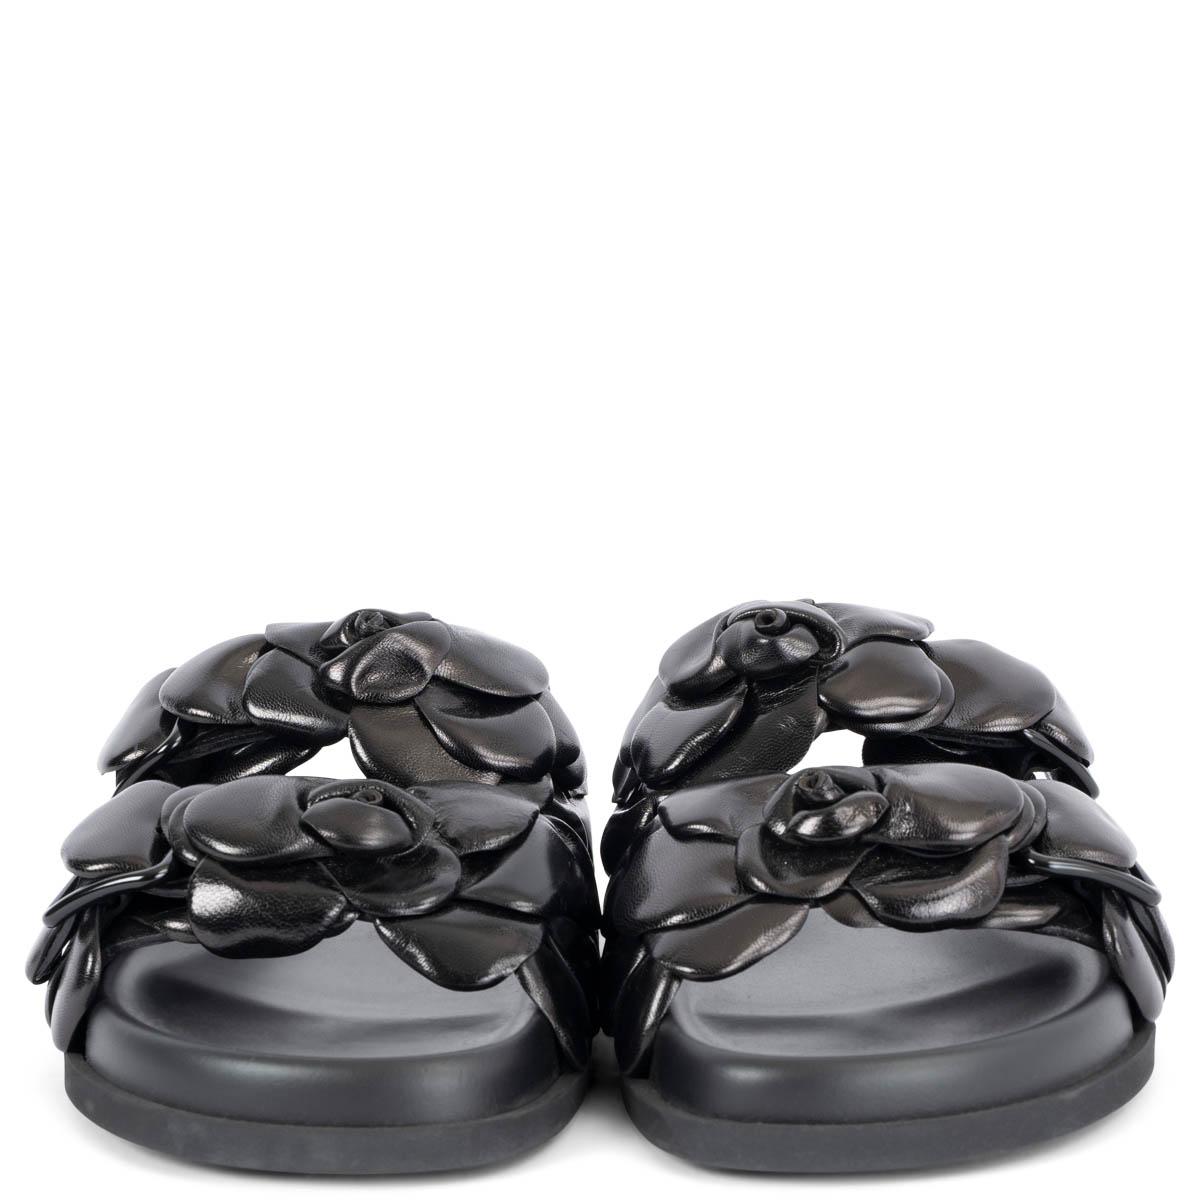 100% authentic Valentino Garavani Atelier Shoe 03 Rose Edition black kidskin flat slide sandal with footbed. Upper embellished with different sized leather petals, creating a 3D rose detail. Finished with a rubber sole. Brand new. Come with dust